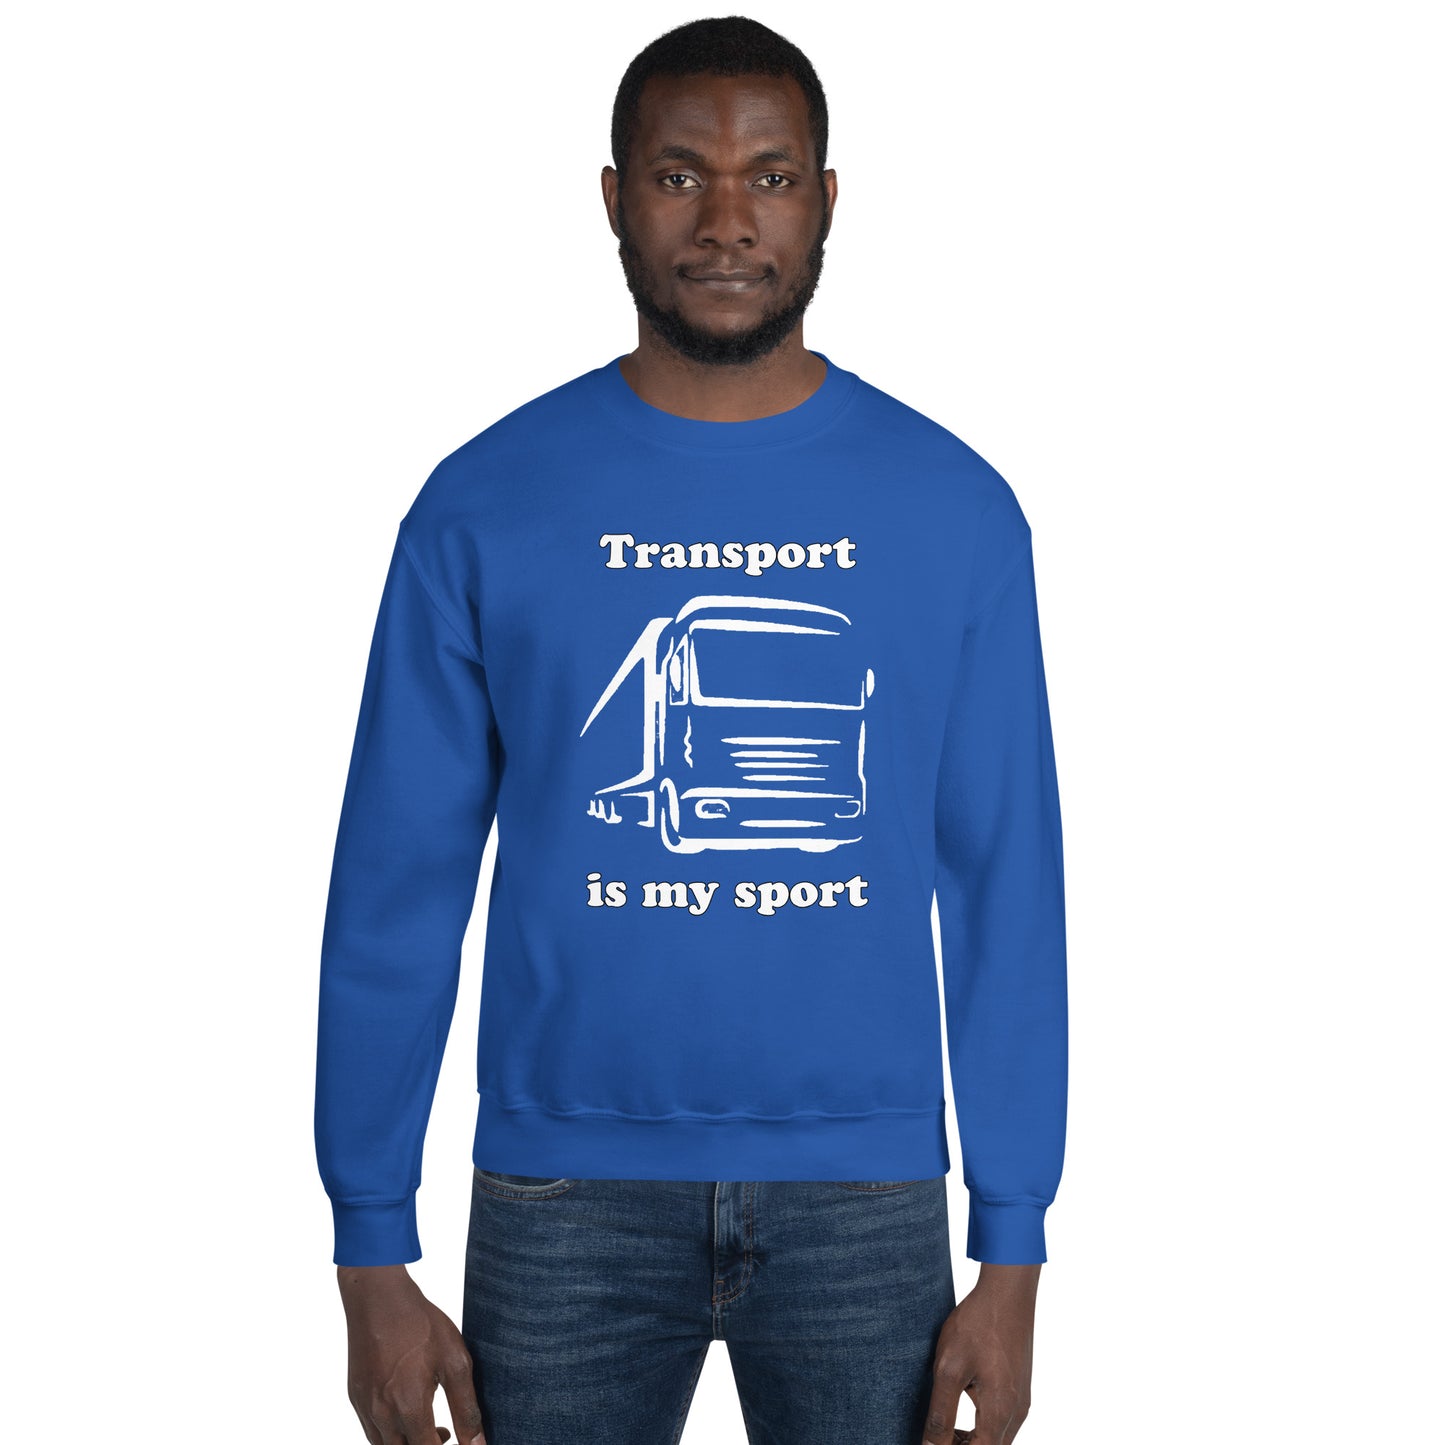 Man with royal blue sweatshirt with picture of truck and text "Transport is my sport"